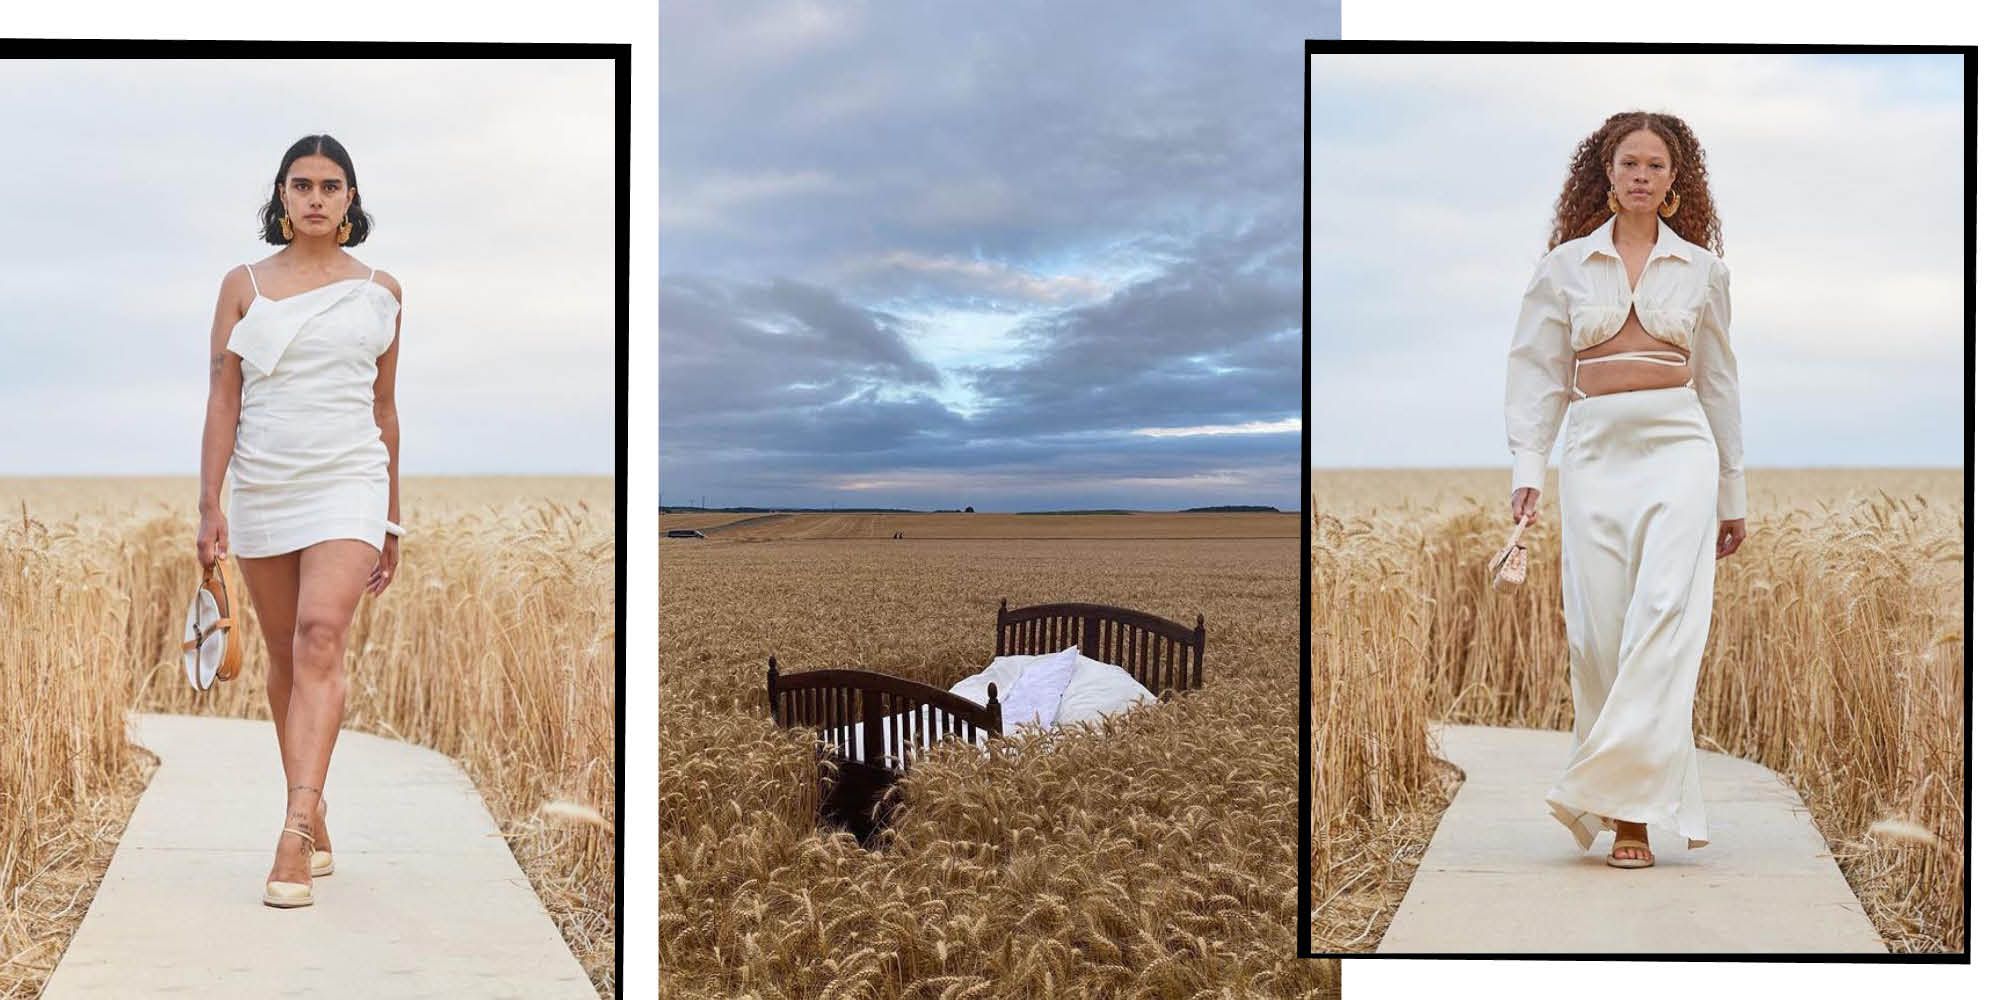 Jacquemus's Spring/Summer 2021 Show Was in a Wheat Field